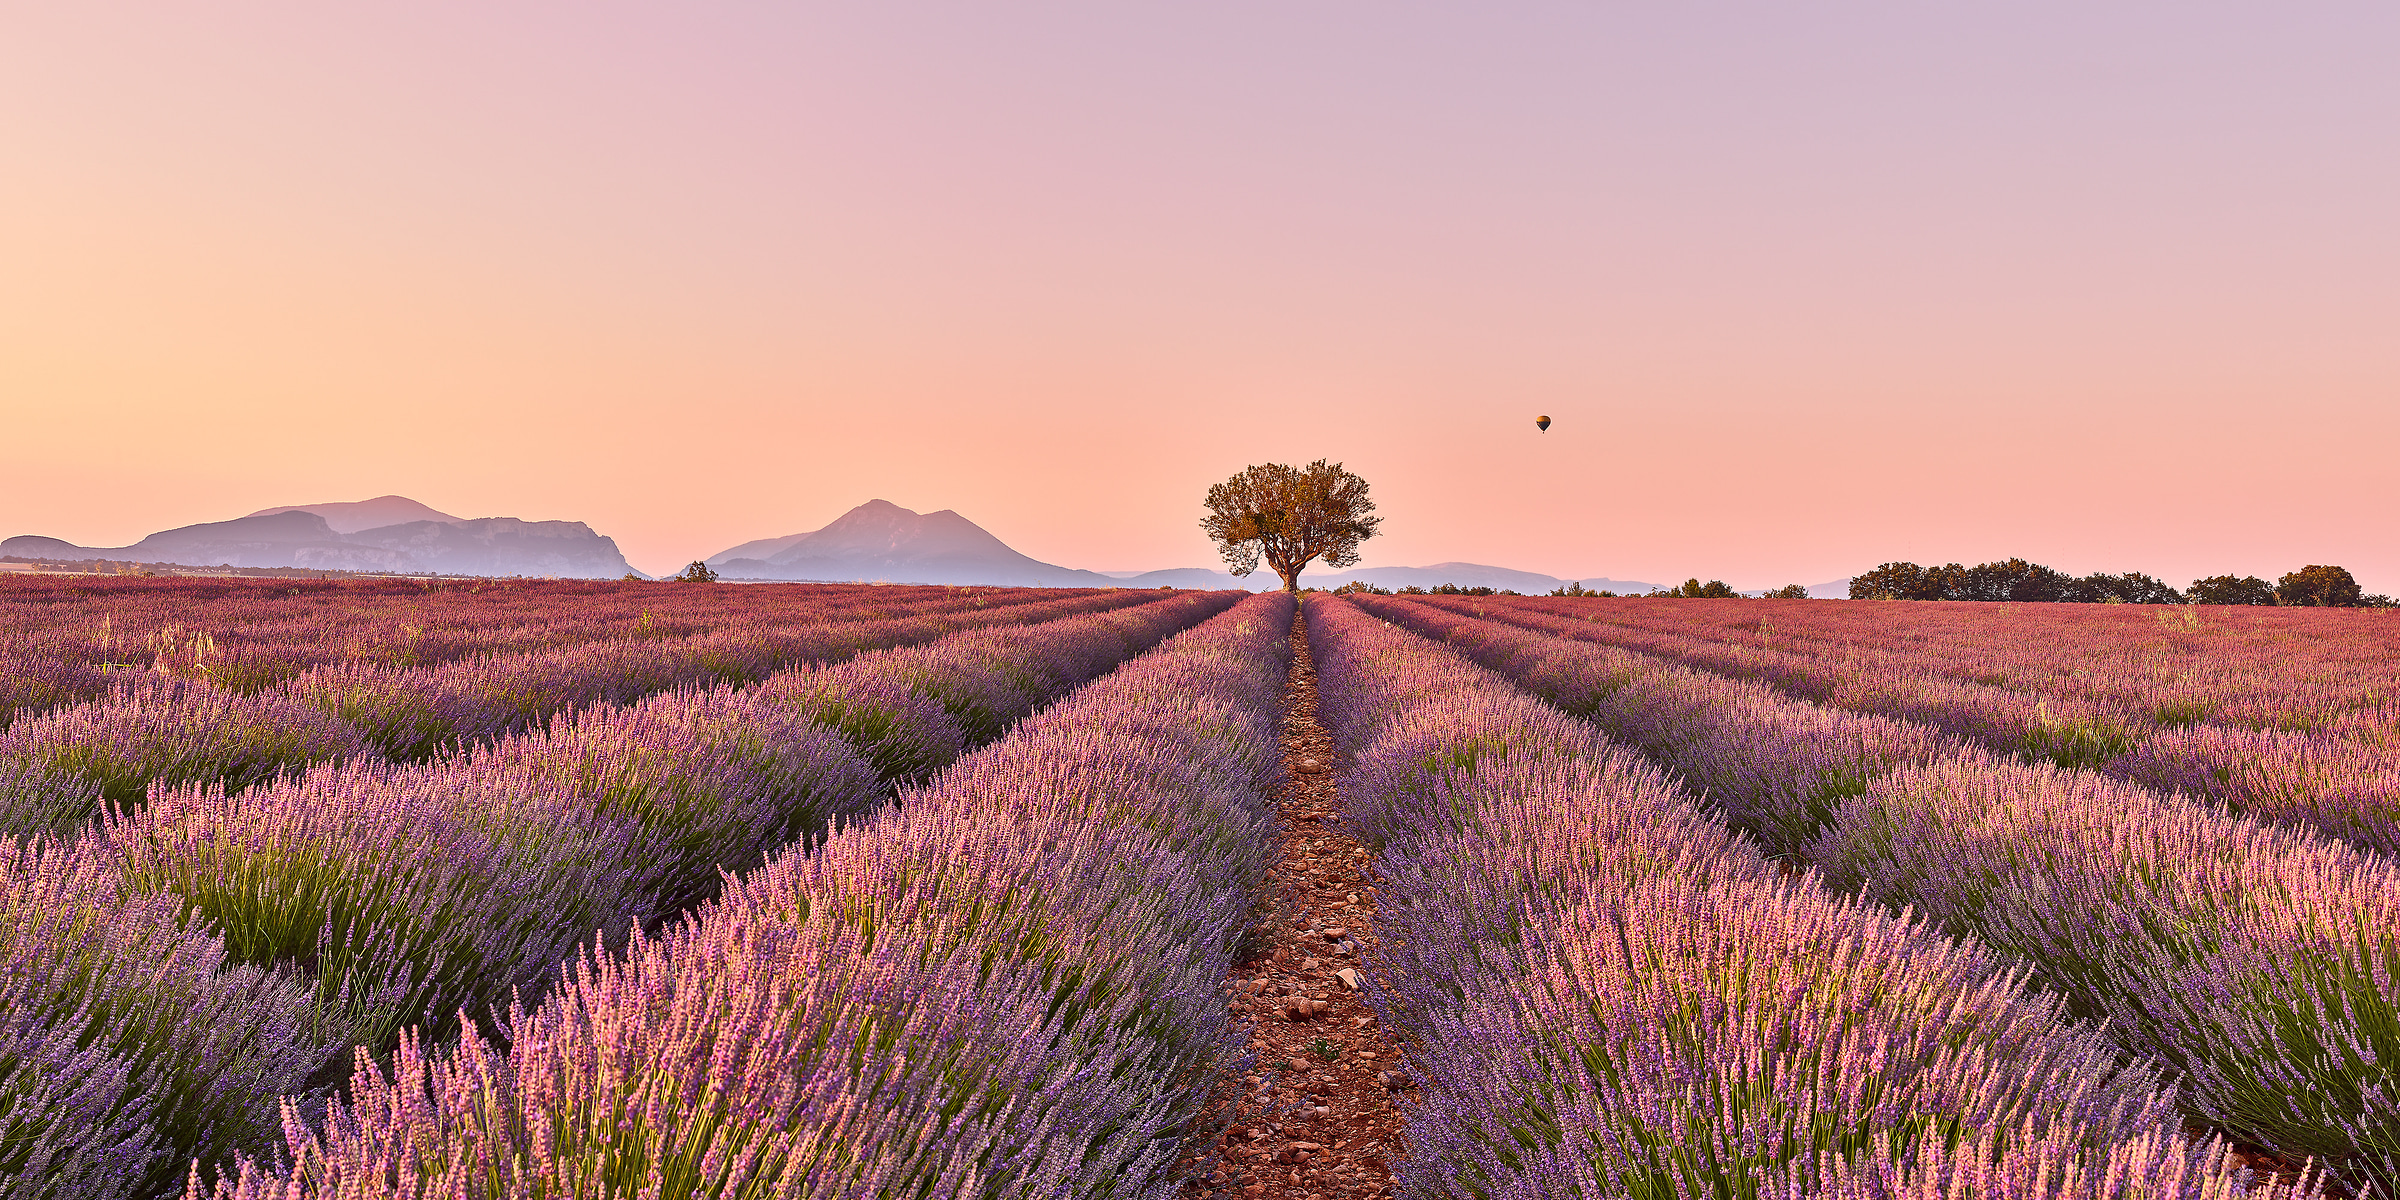 139 megapixels! A very high resolution, large-format VAST photo print of a lavender field in France; nature landscape photograph created by David Meaux in Valensole Plateau, Valensole, Provence-Alpes-Côte d'Azur, France